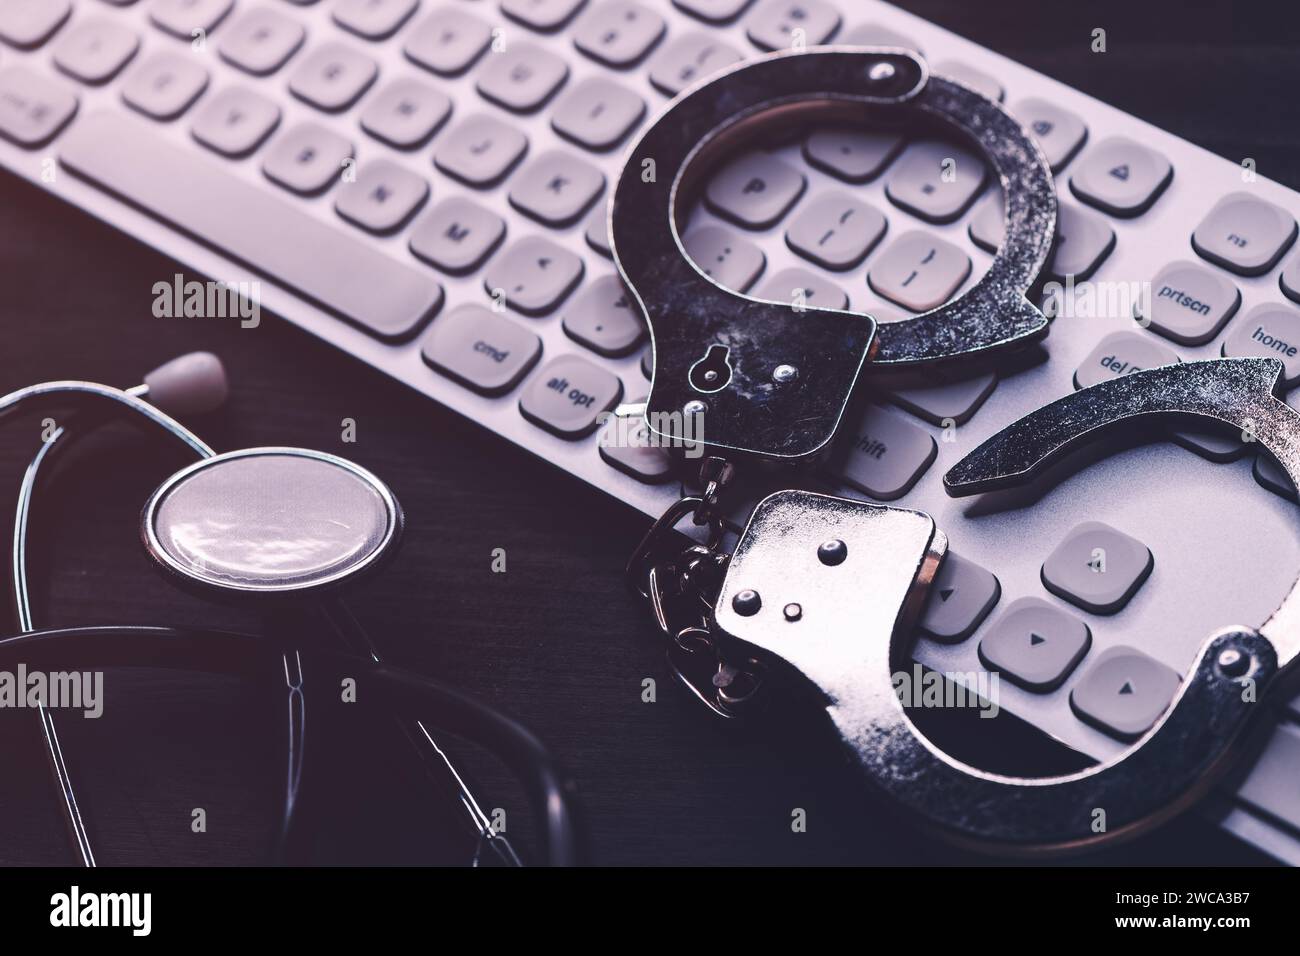 Stethoscope handcuffs and computer keyboard. Criminal activity in healthcare industry concept. Selective focus. Stock Photo